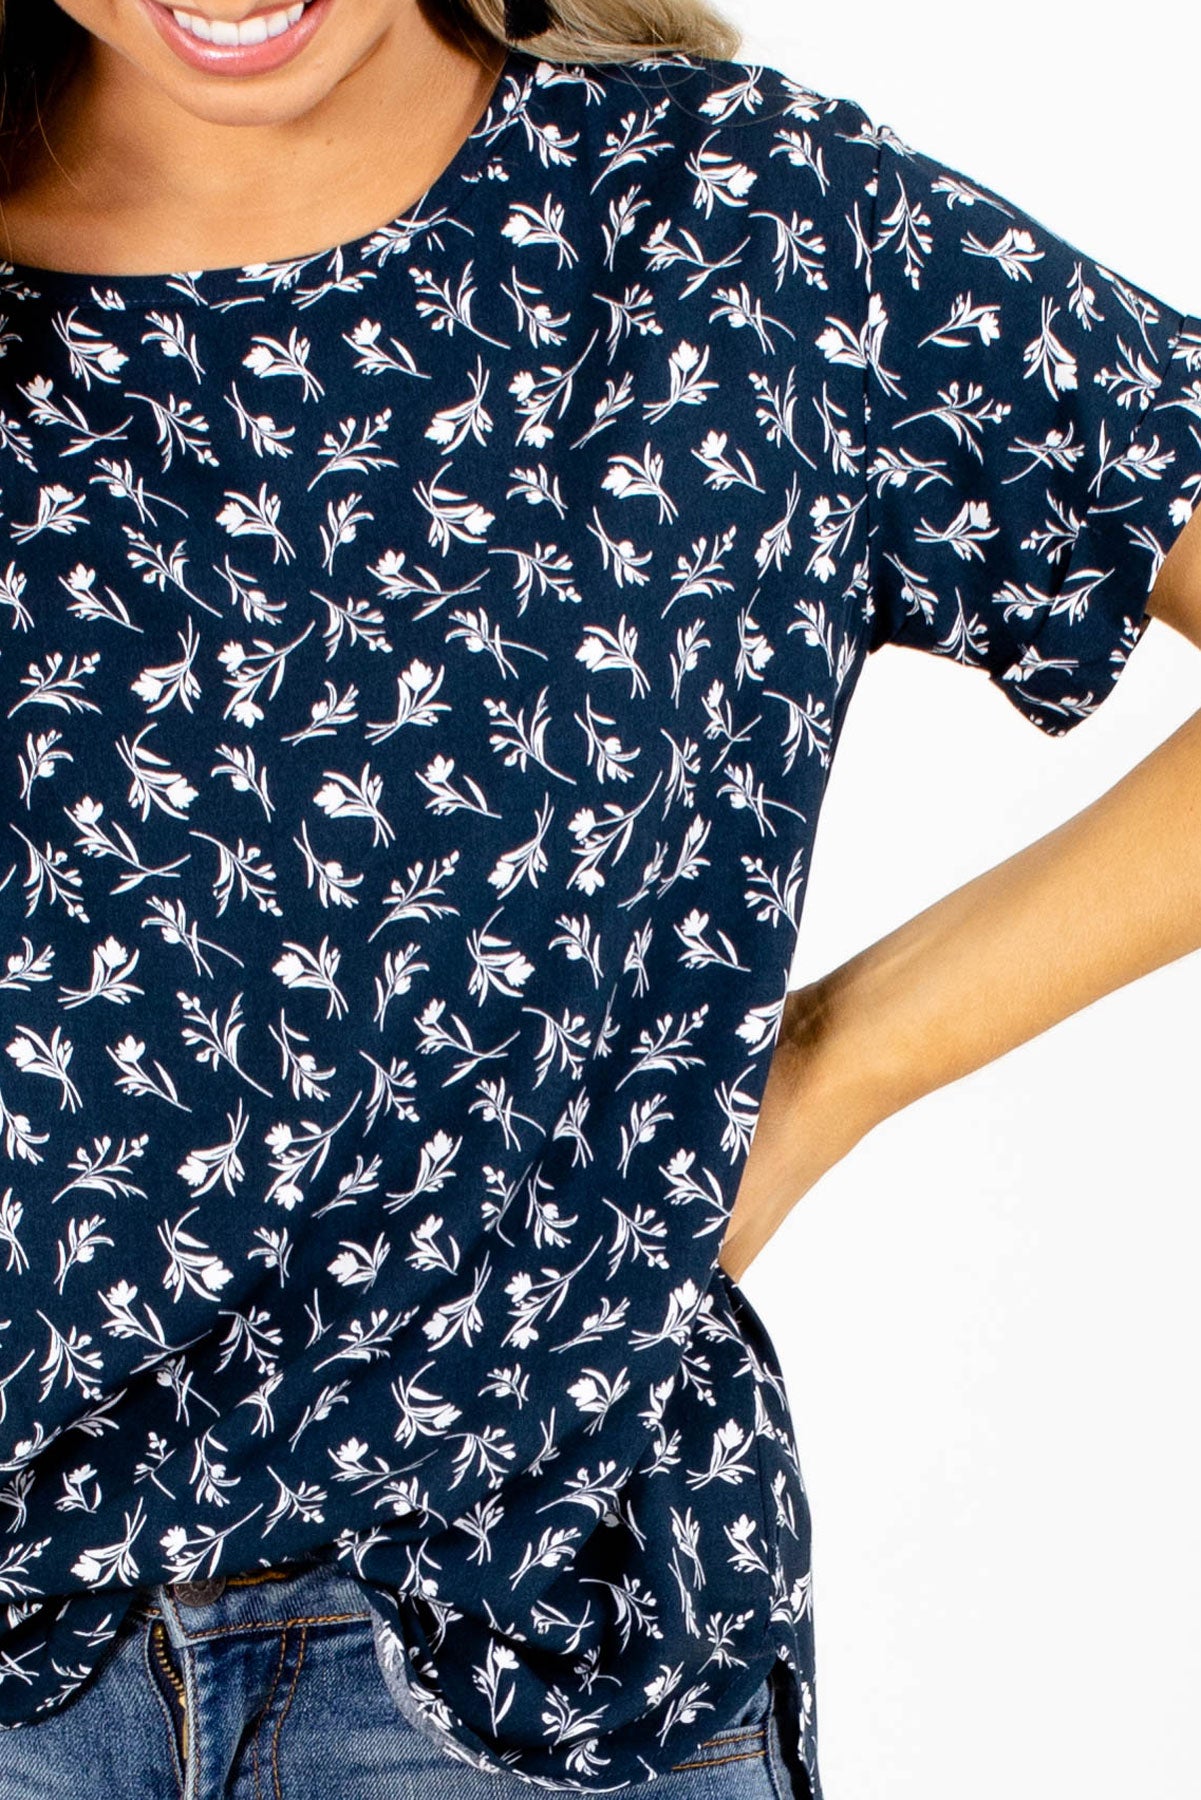 Boutique Top for Women in Navy and Floral